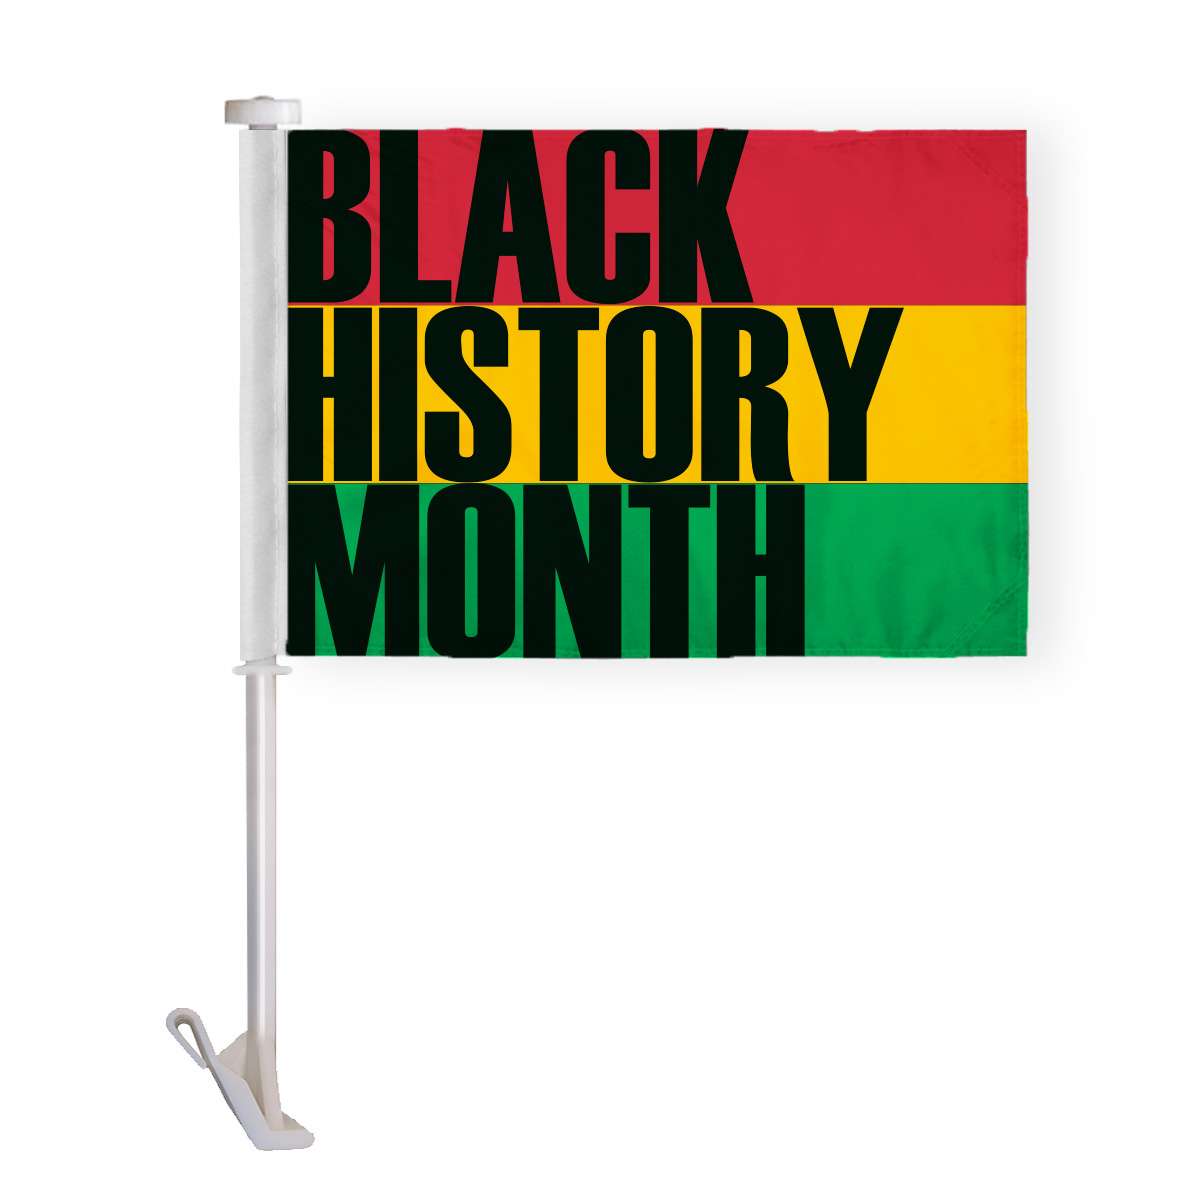 AGAS Black History Month Premium 10.5x15 inch Double Sided Car Flags Polyester